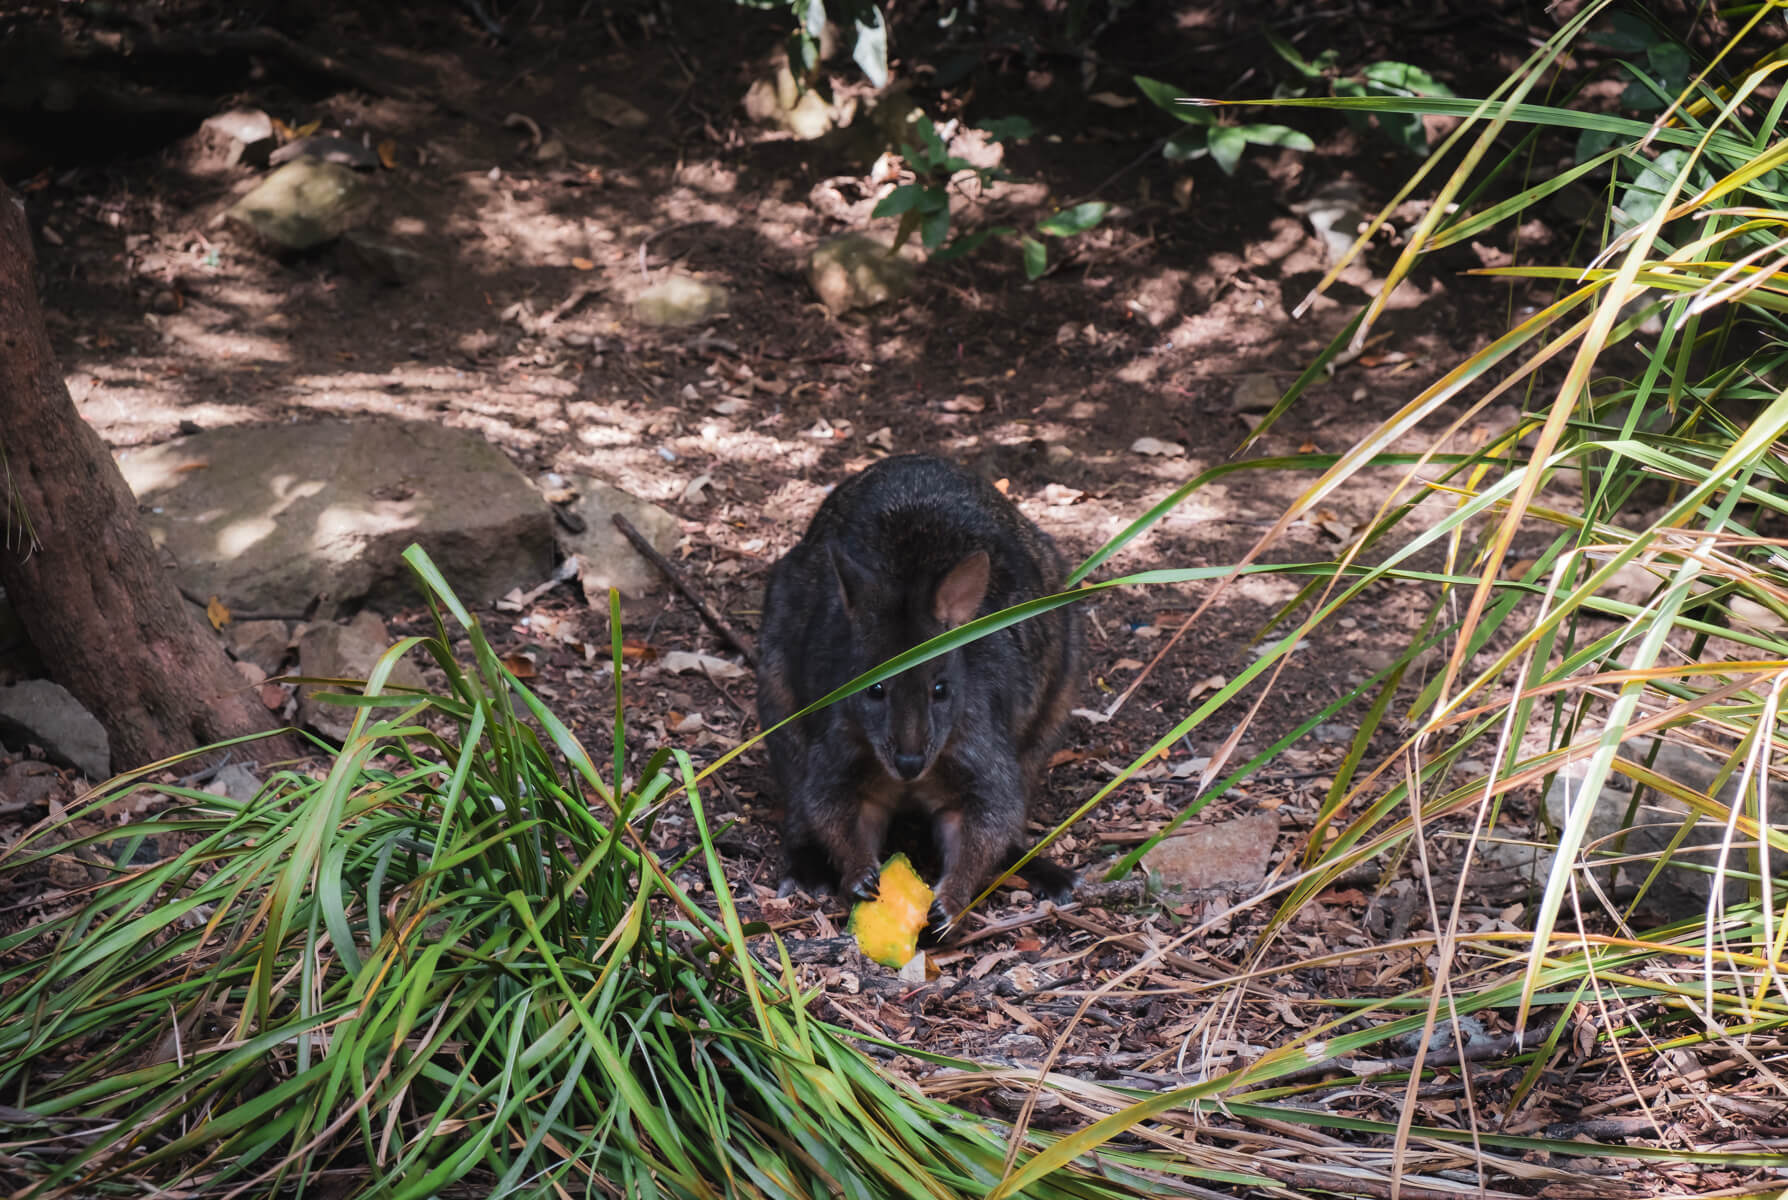 A pademelon eating a melon scrap at Cataract Gorge, a popular attraction in Launceston